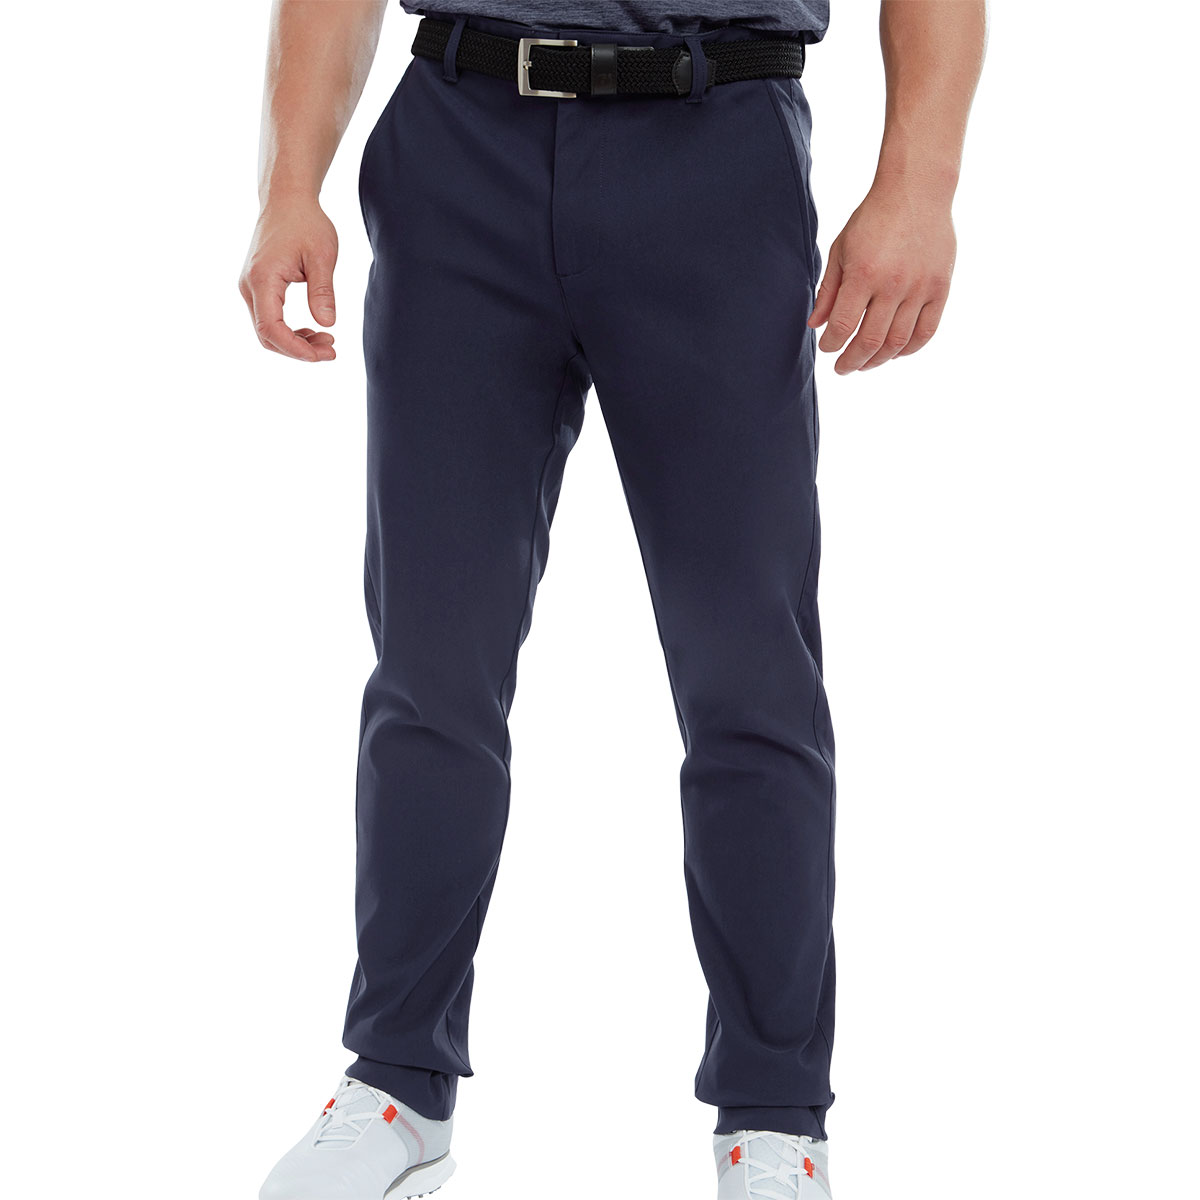 FootJoy Men's ThermoSeries Golf Trousers from american golf